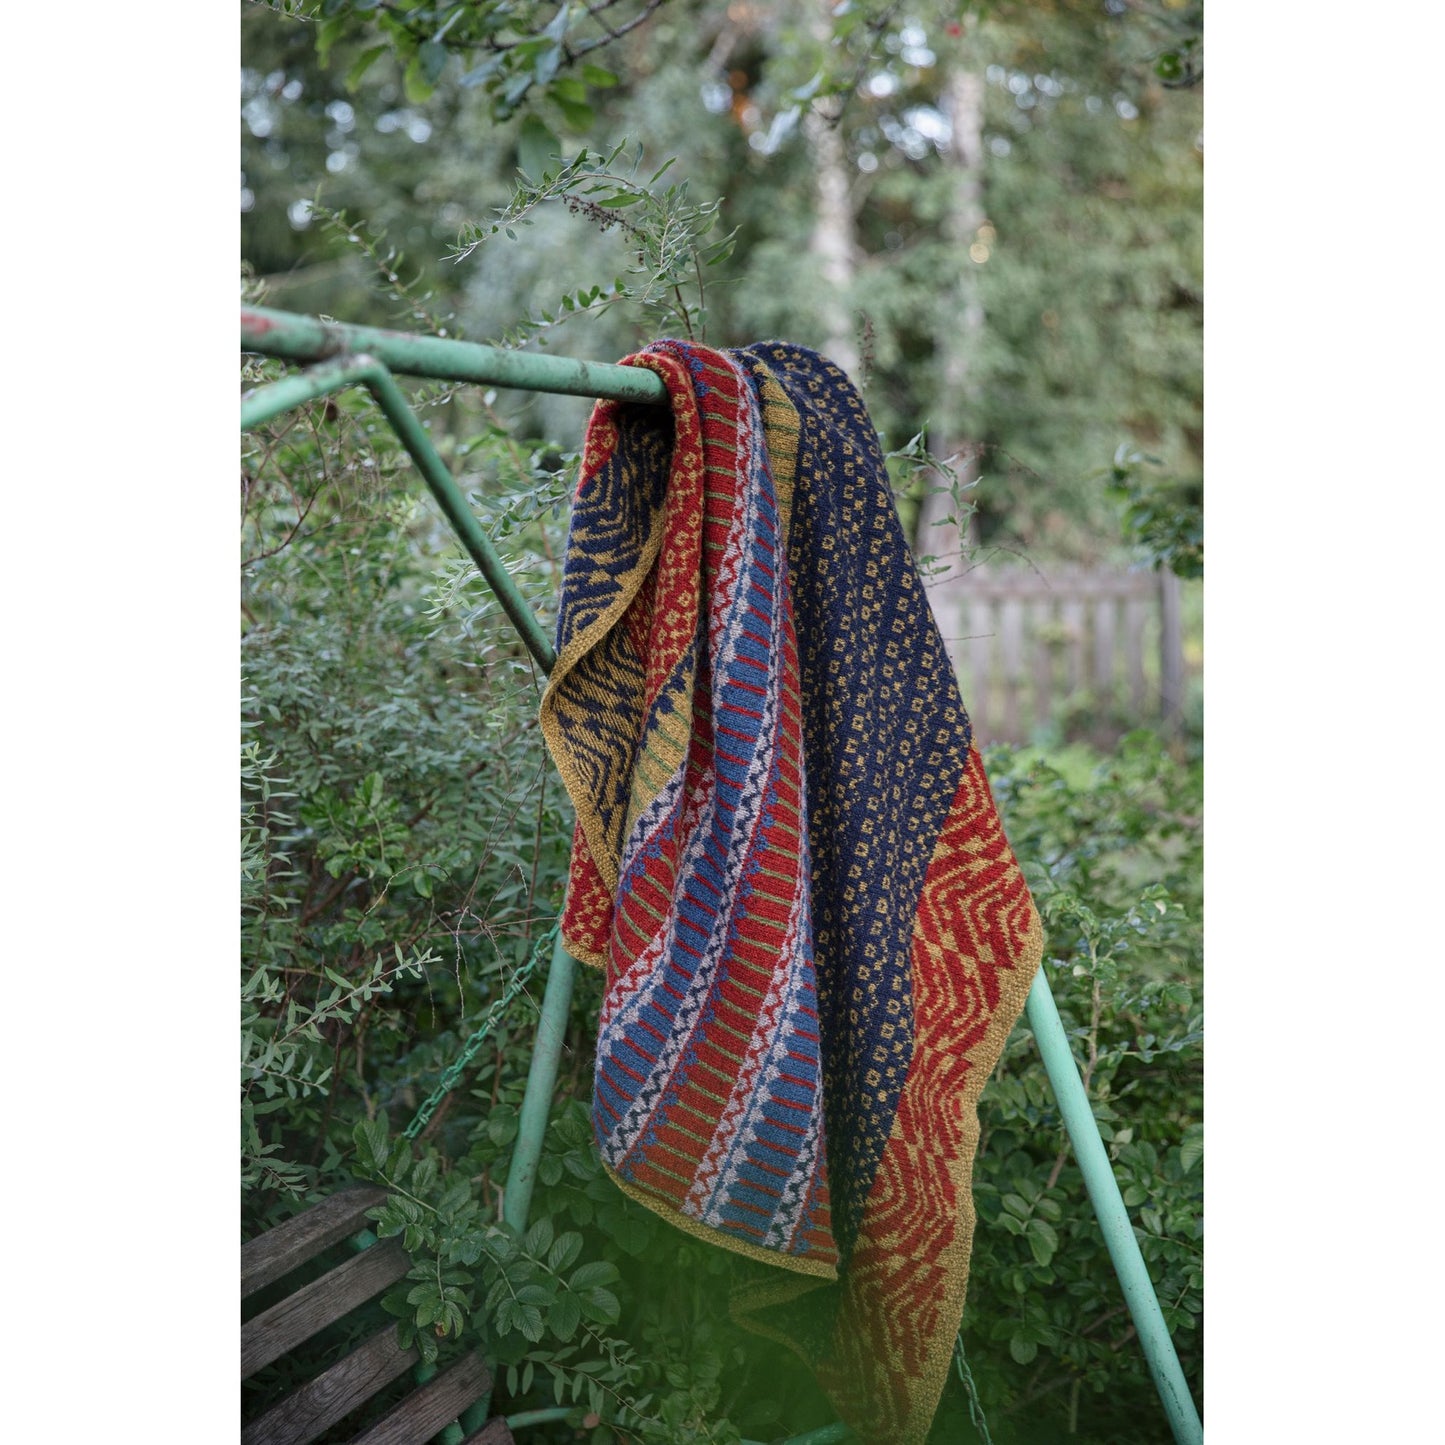 The Knitted Fabric: Colourwork Projects for You and Your Home by Dee Hardwicke